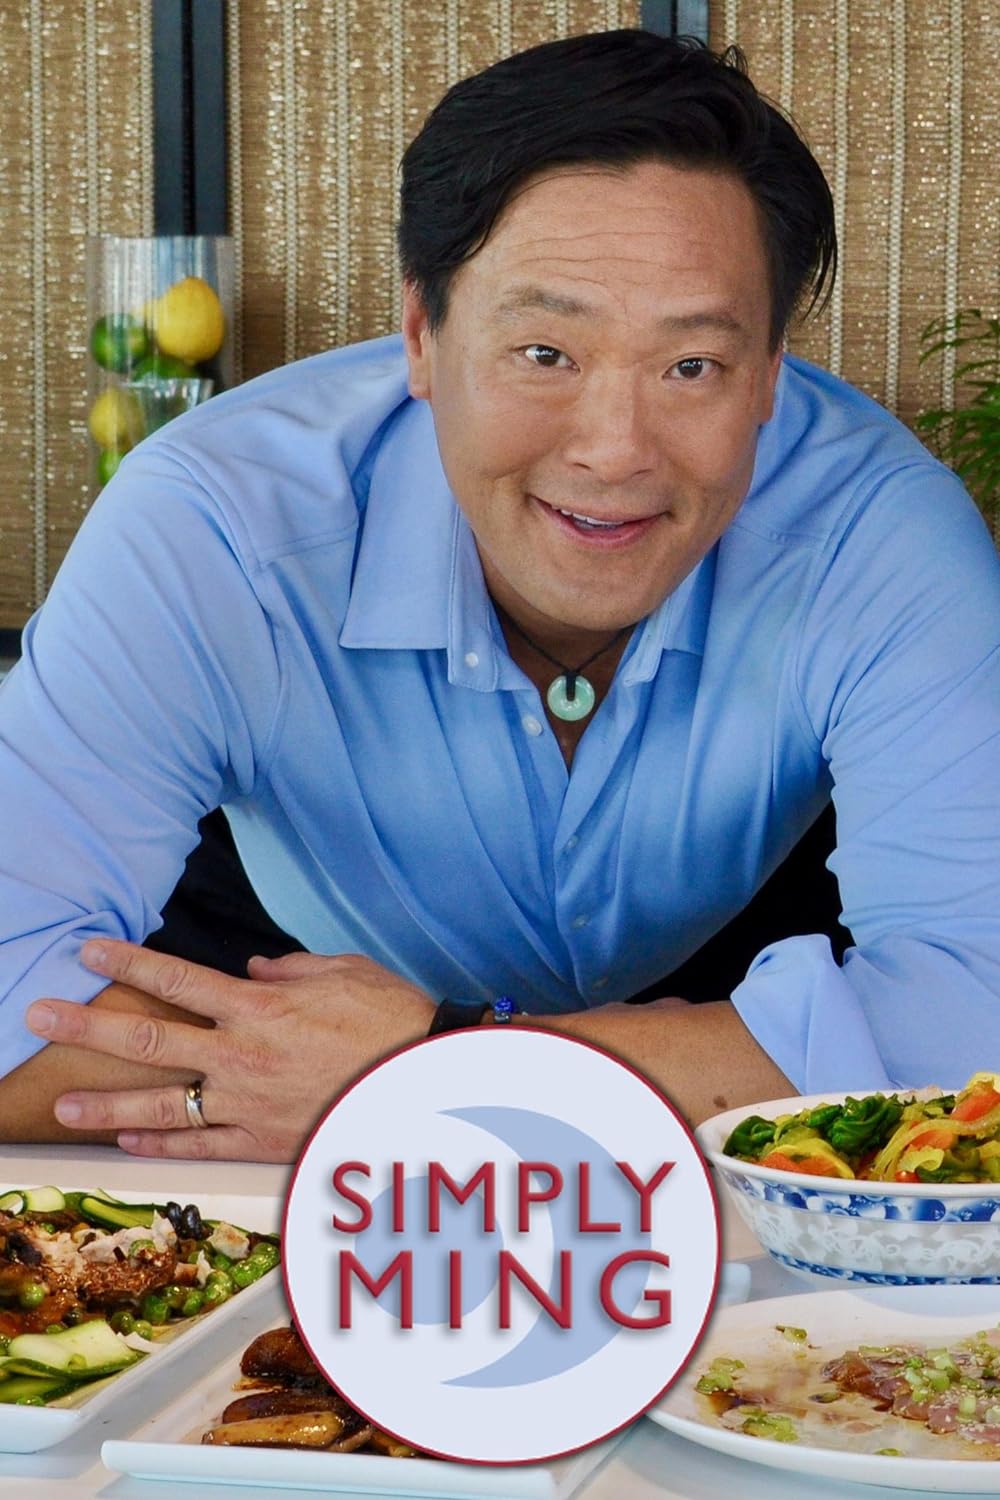 ming simply eztv cooking pbs 2003 tv shows